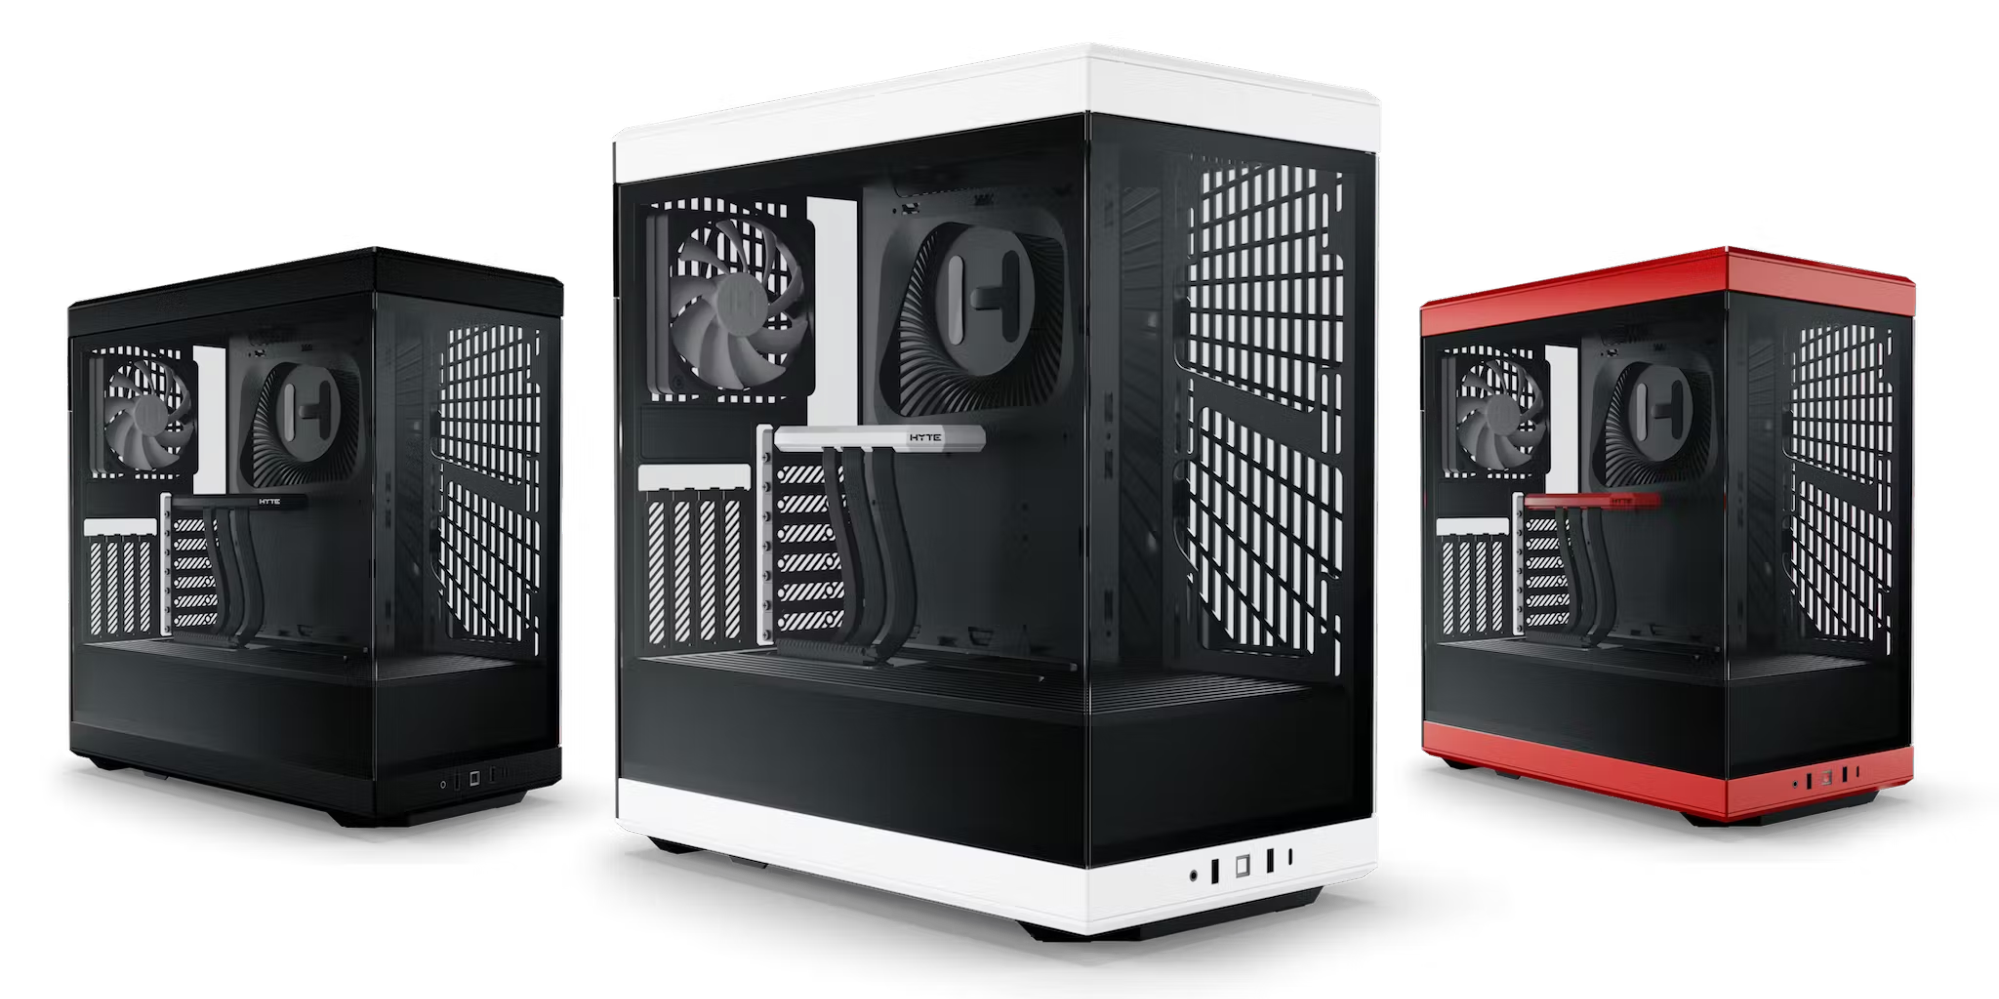 Hyte's Y40 PC Case Is More Compact, Still Offers Panoramic Views of Your PC  Parts